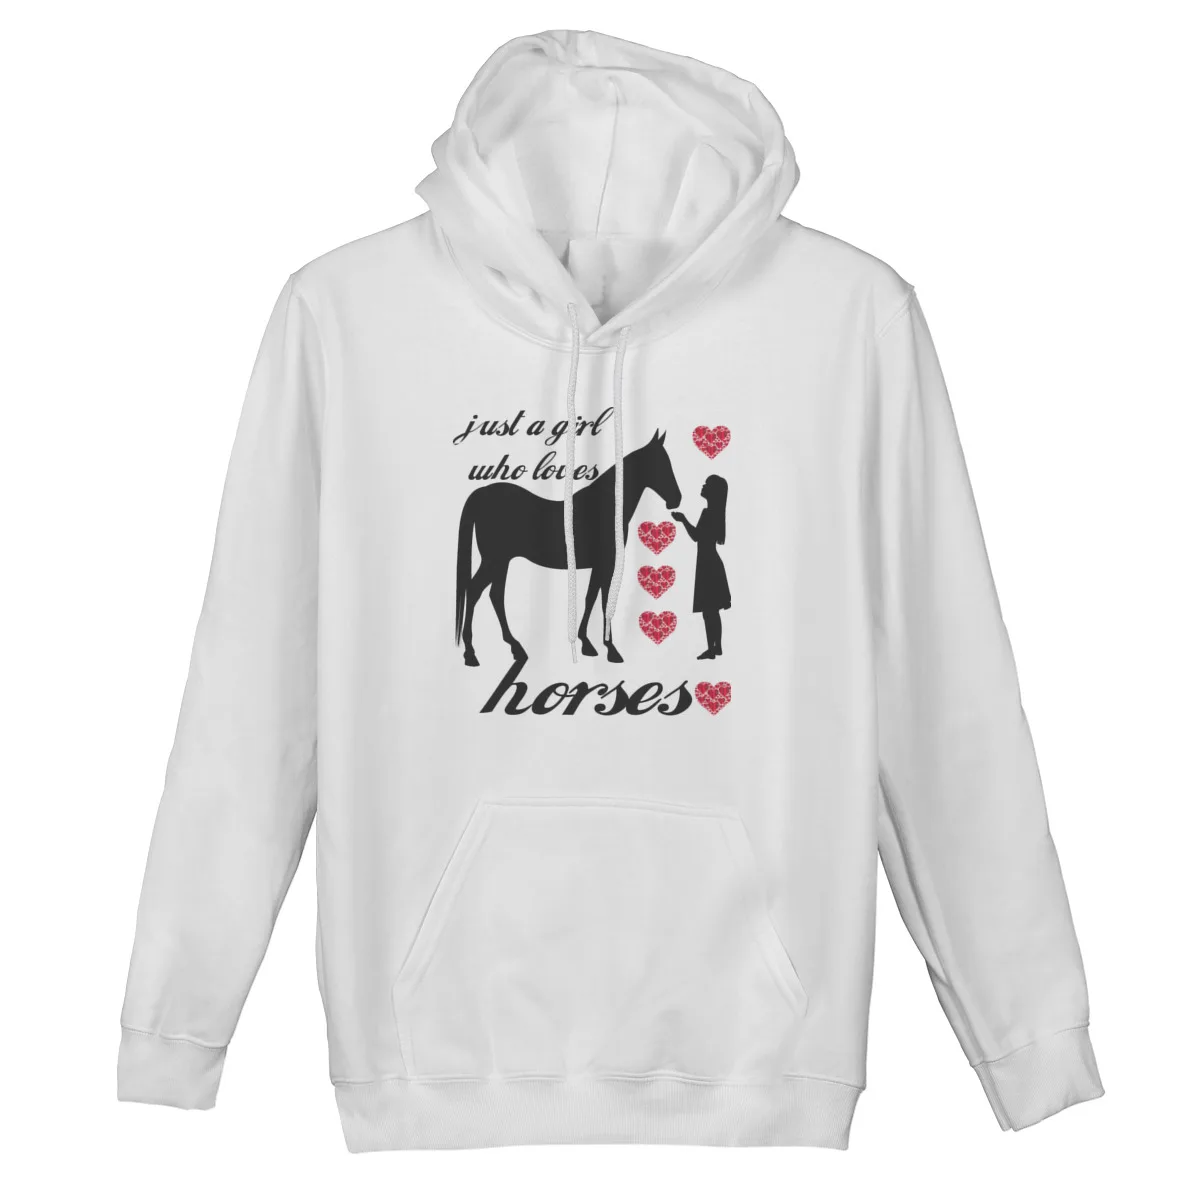 

Men's Hoodie Just A Girl Who Loves Horses Funny GiftPrint Funny Couples Matching Punk Retro Sweatshirt 37419